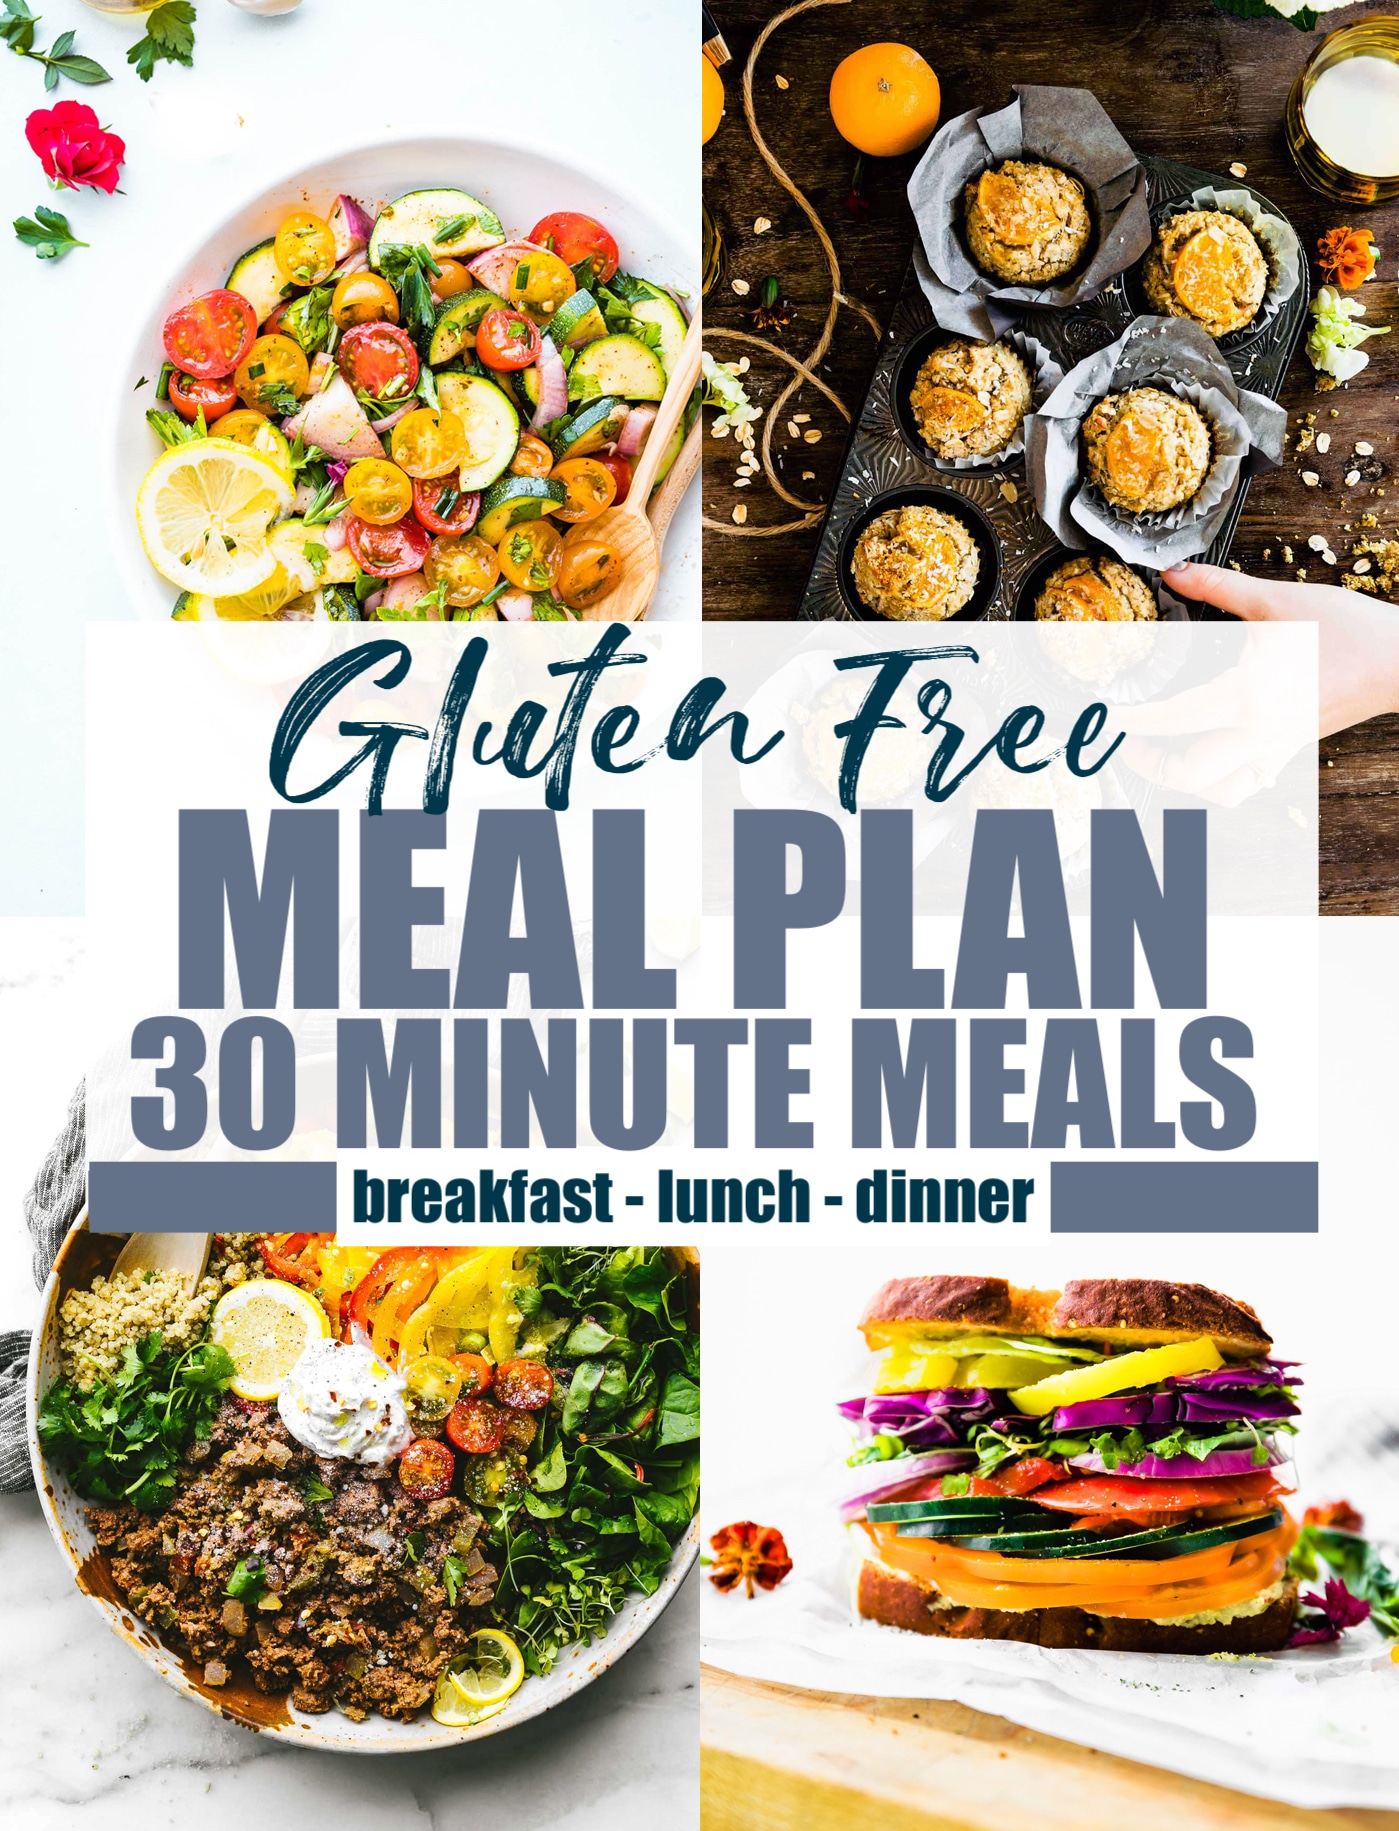 Gluten Free Meal Plan with 30 Minute Meals (or Less!)